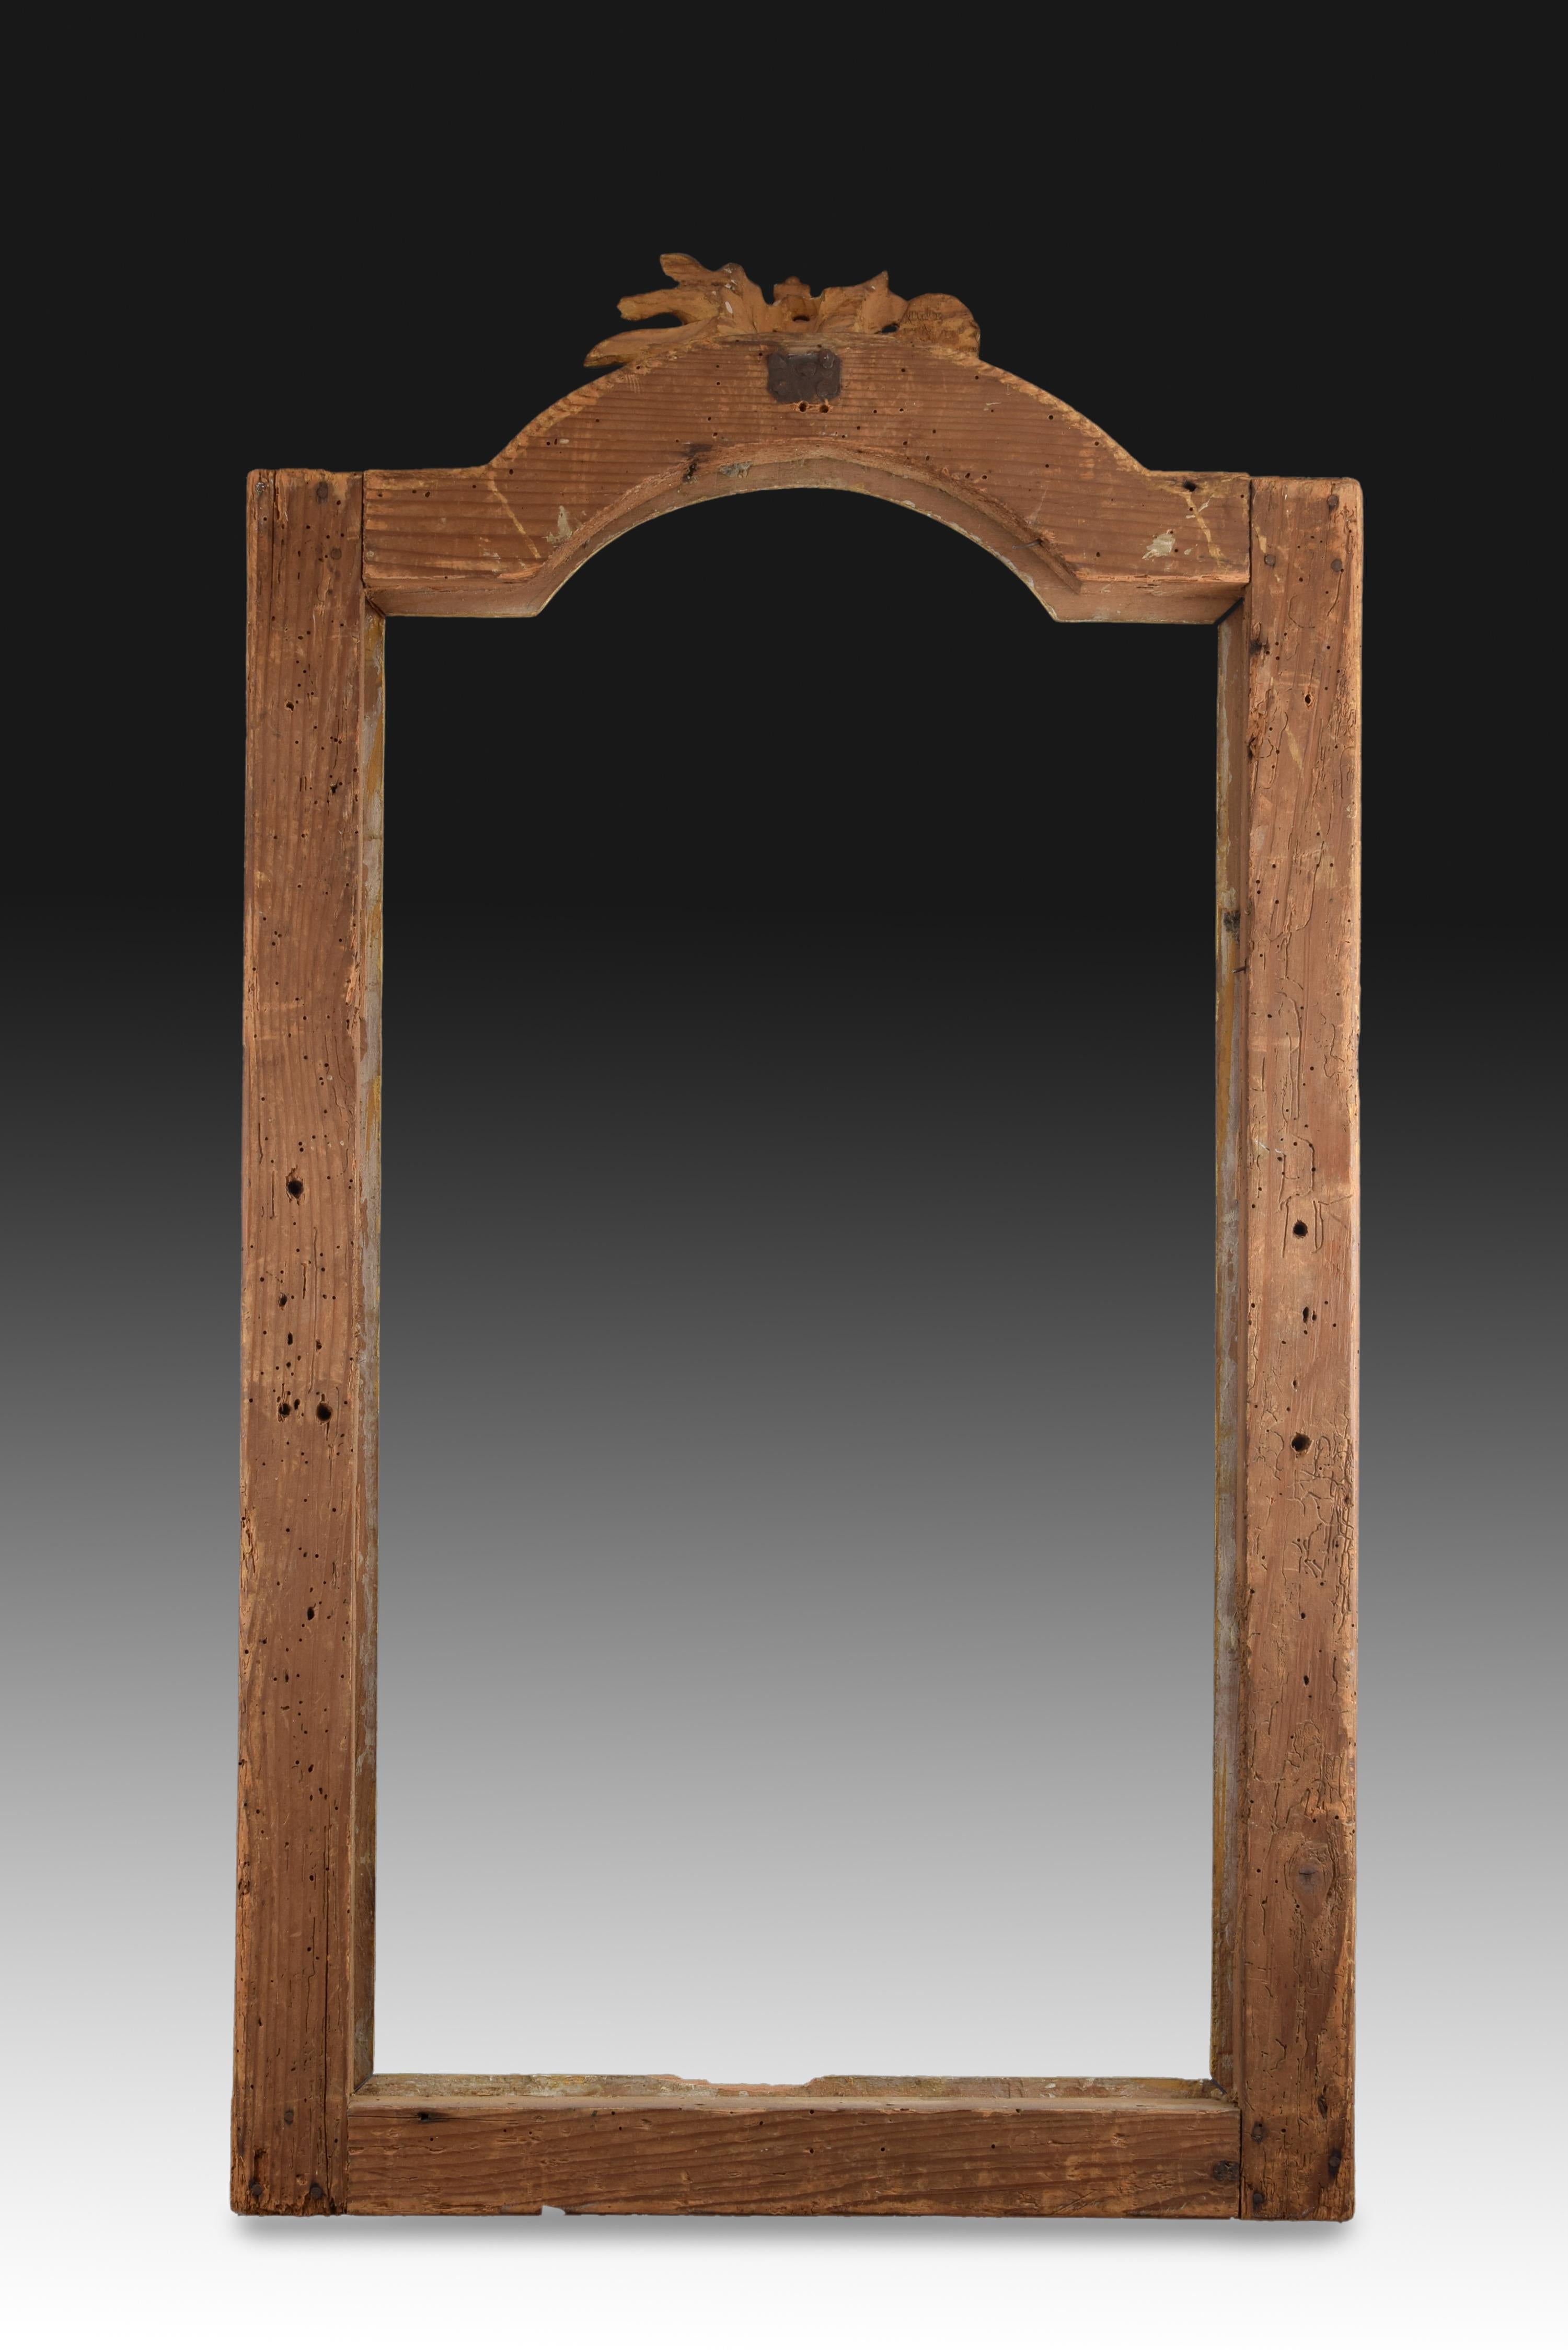 Framework. Carved and gilded wood, 18th century.
 Rectangular frame with a semicircular finish in the center of the upper part, crowned by a composition with leaves and elements of the Passion of Christ (Crown of Thorns, Nails ...) decorated by a